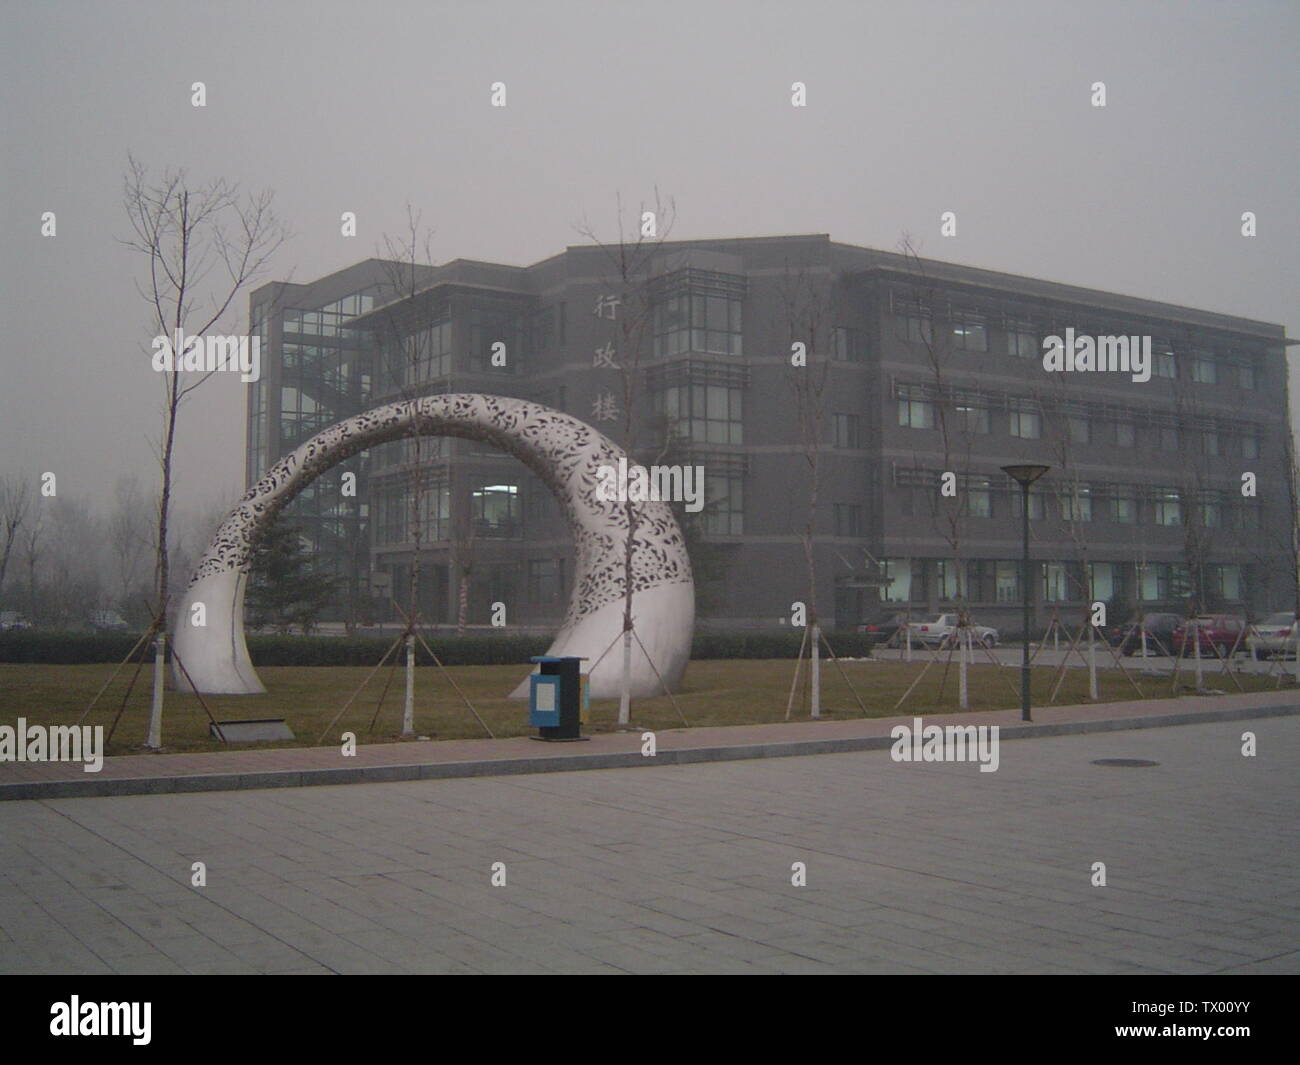 The Administration Building Of Beijing Technology And Business University A Ae Aœ Aº A A A A Cs E œae Ae Taken In 07 12 29 Uploaded To Fi Pedia In 08 01 10 Transferred From Fi Pedia Mart Kaukonen At Fi Pedia Stock Photo Alamy